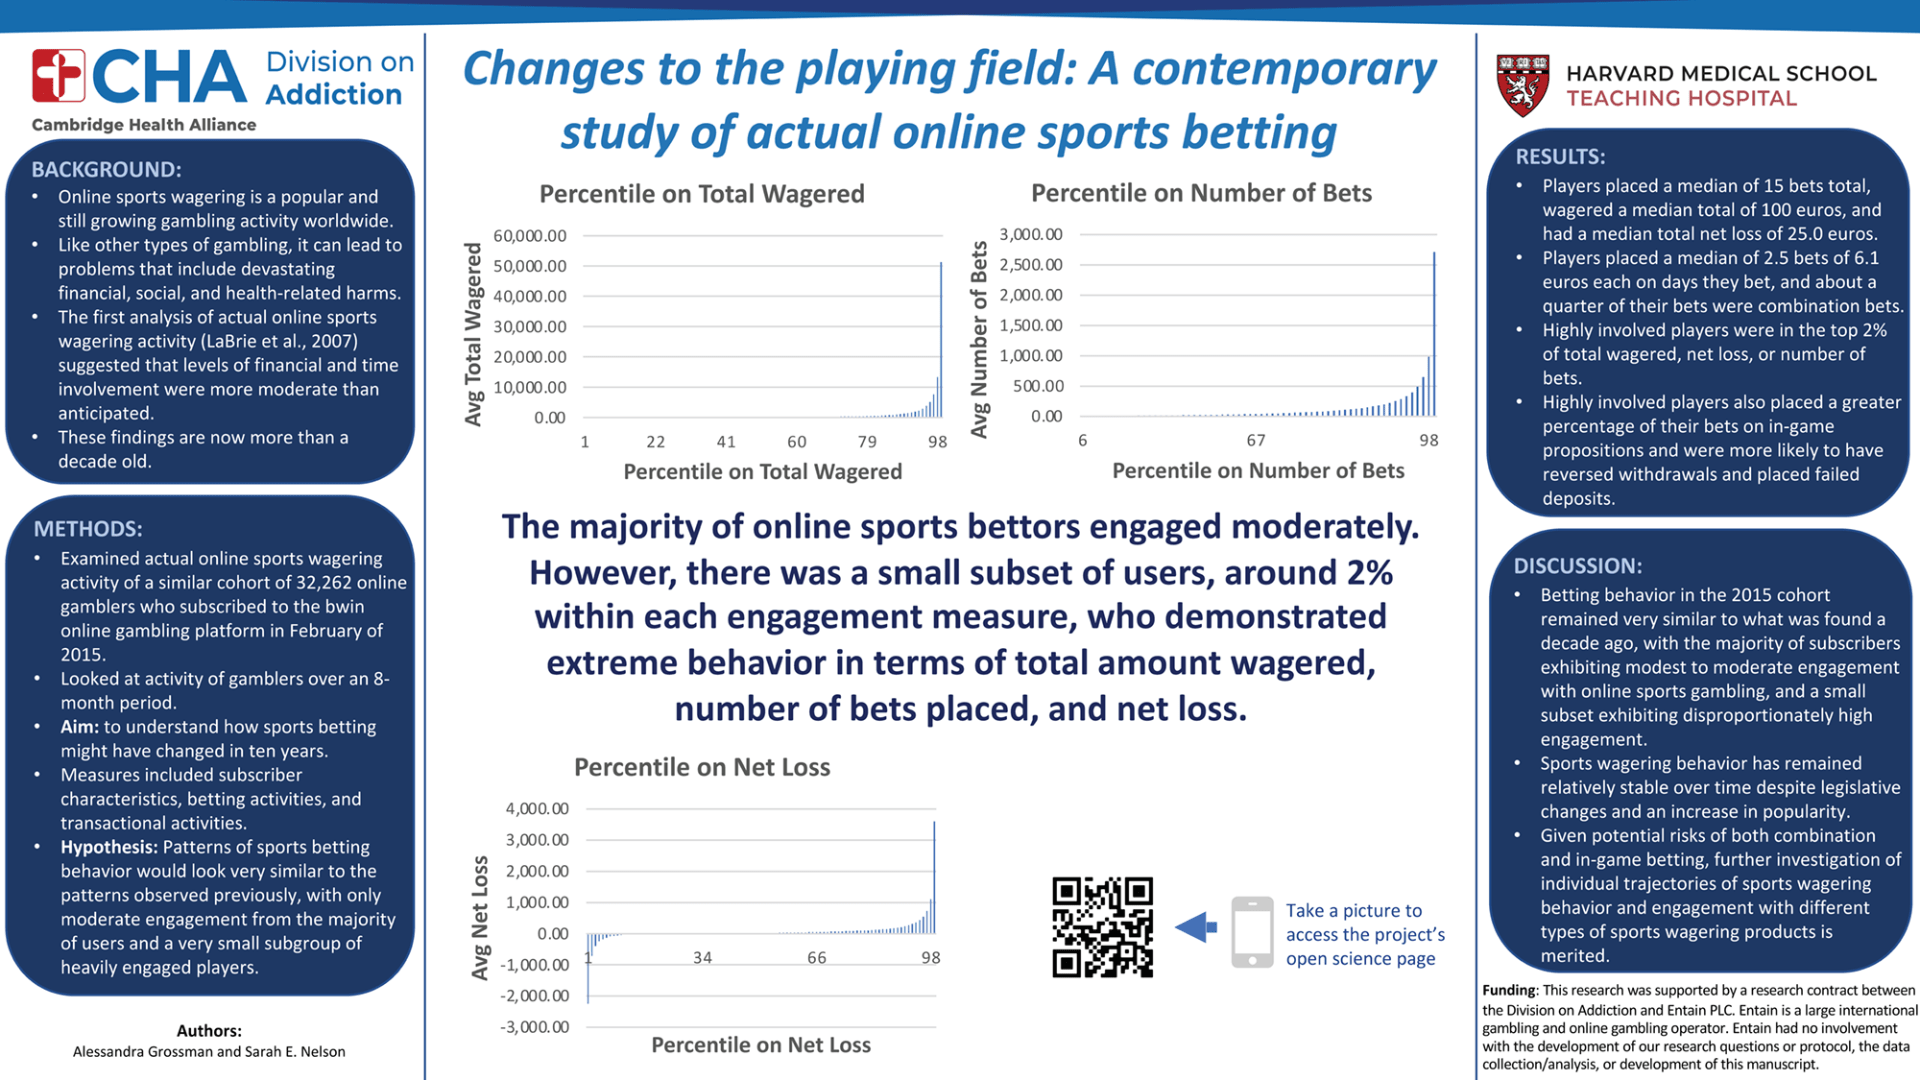 Changes to the Playing Field: A Contemporary Study of Actual Online Sports Betting